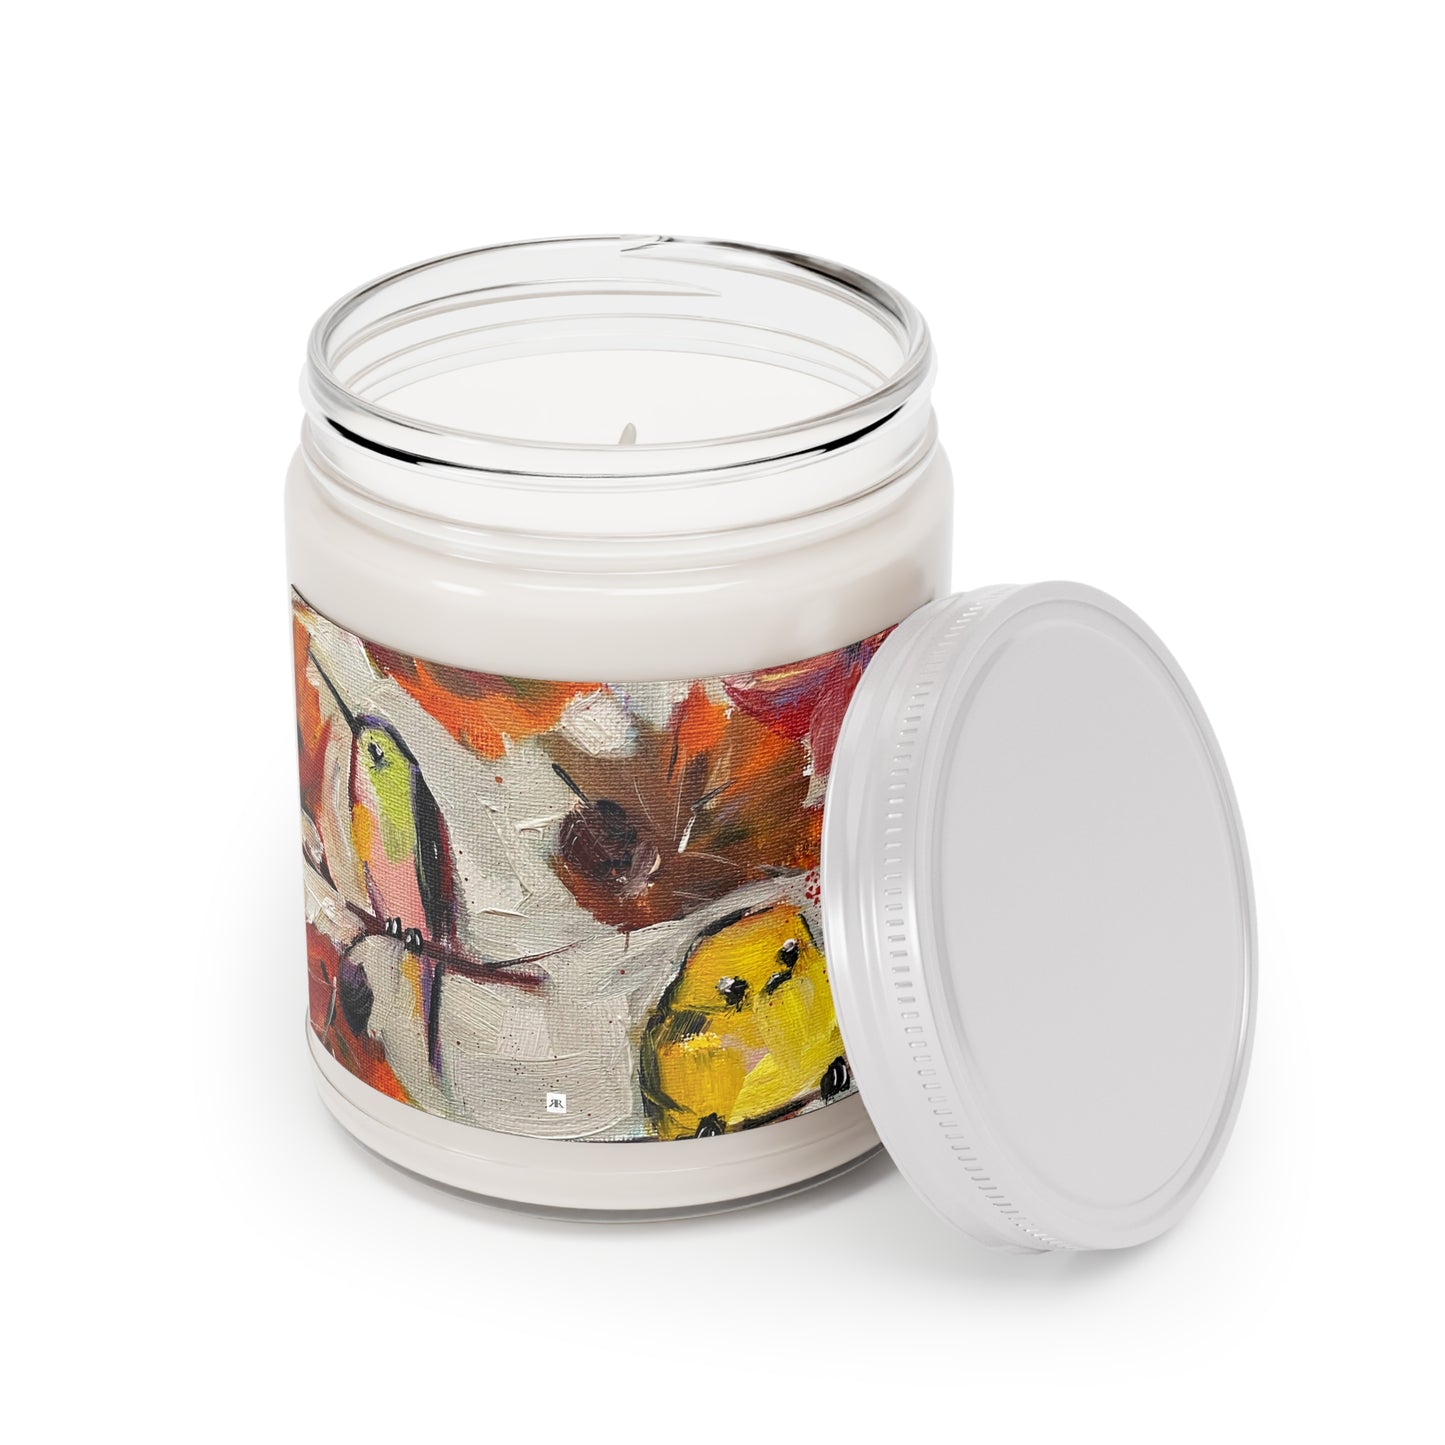 Fall Feathers Scented Candle 9oz